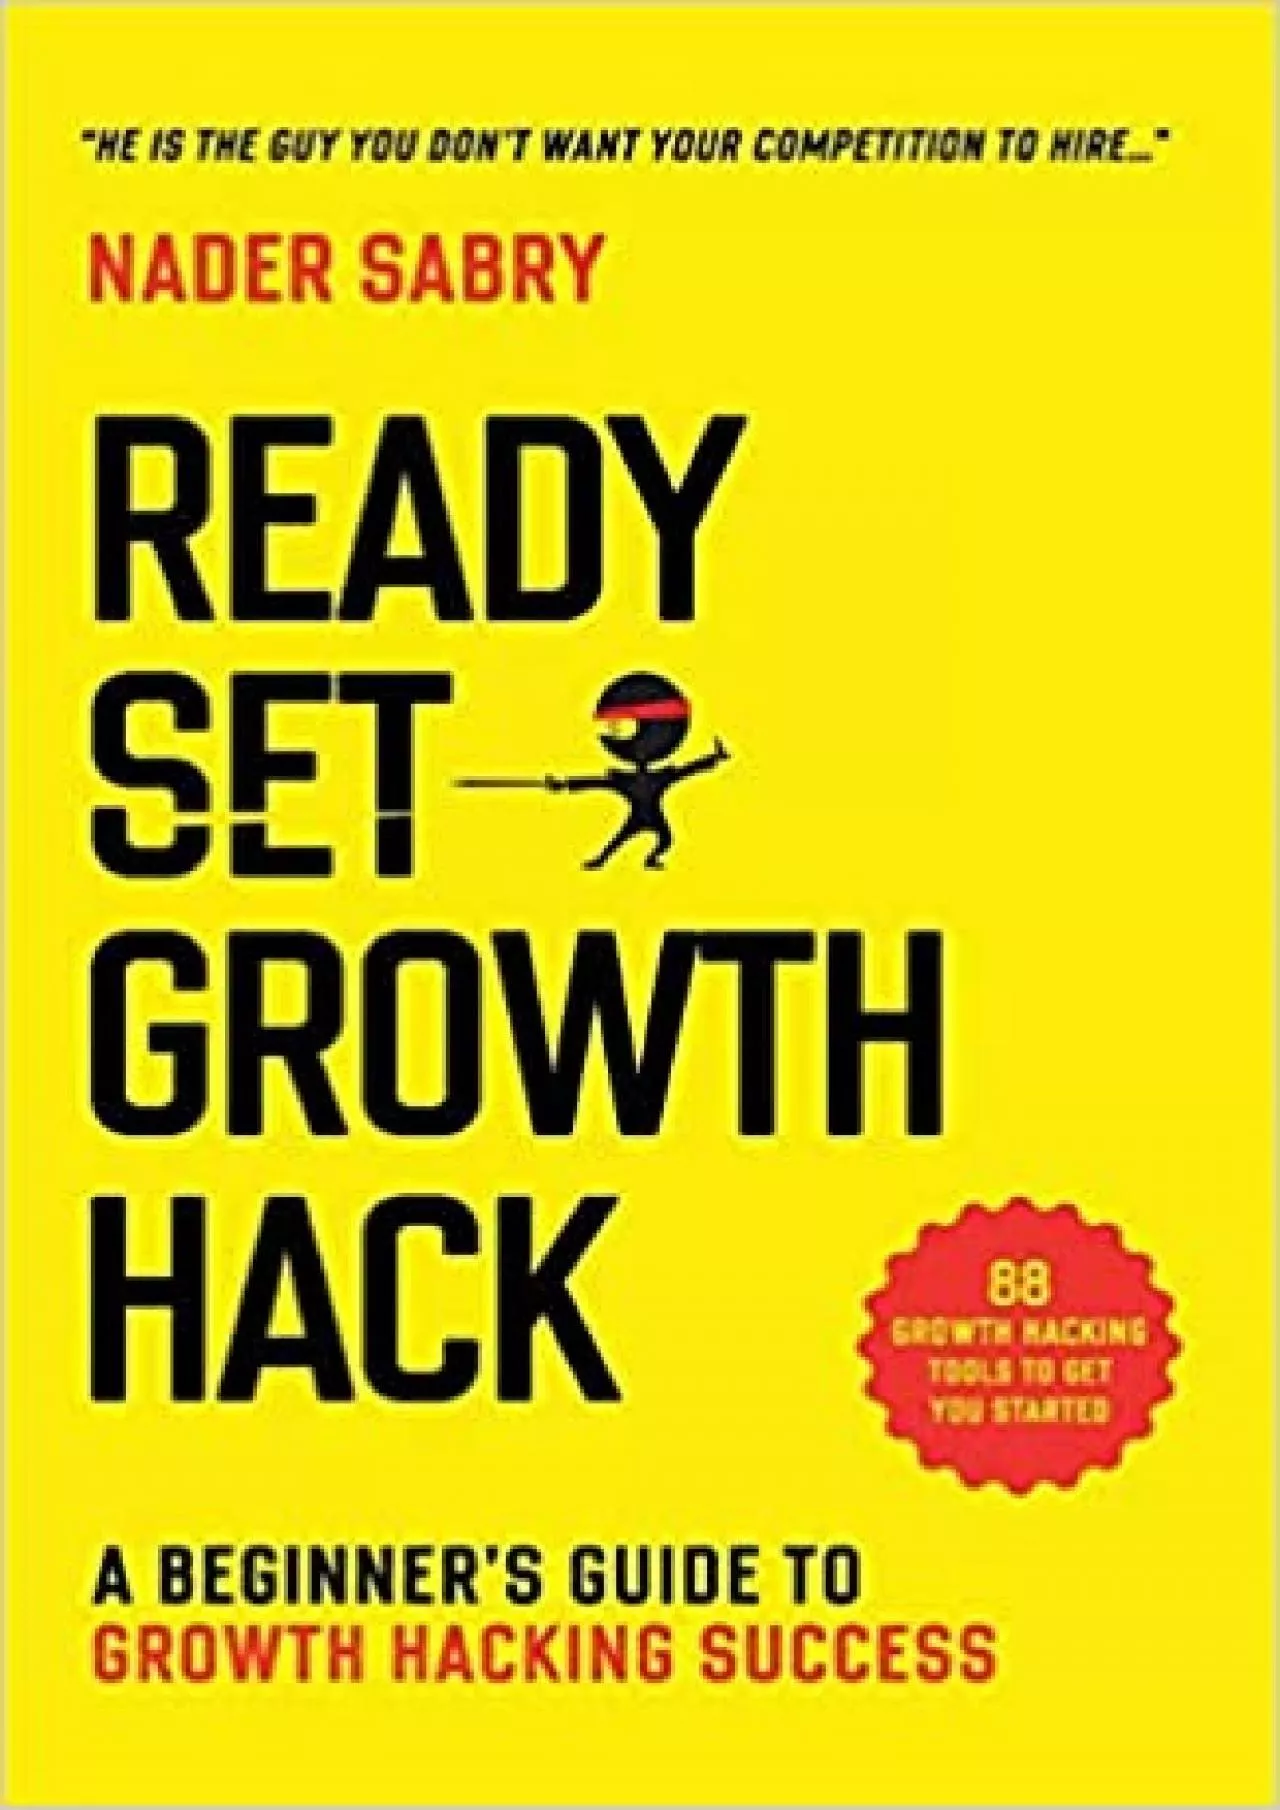 Ready, Set, Growth hack A beginners guide to growth hacking success Master the growth